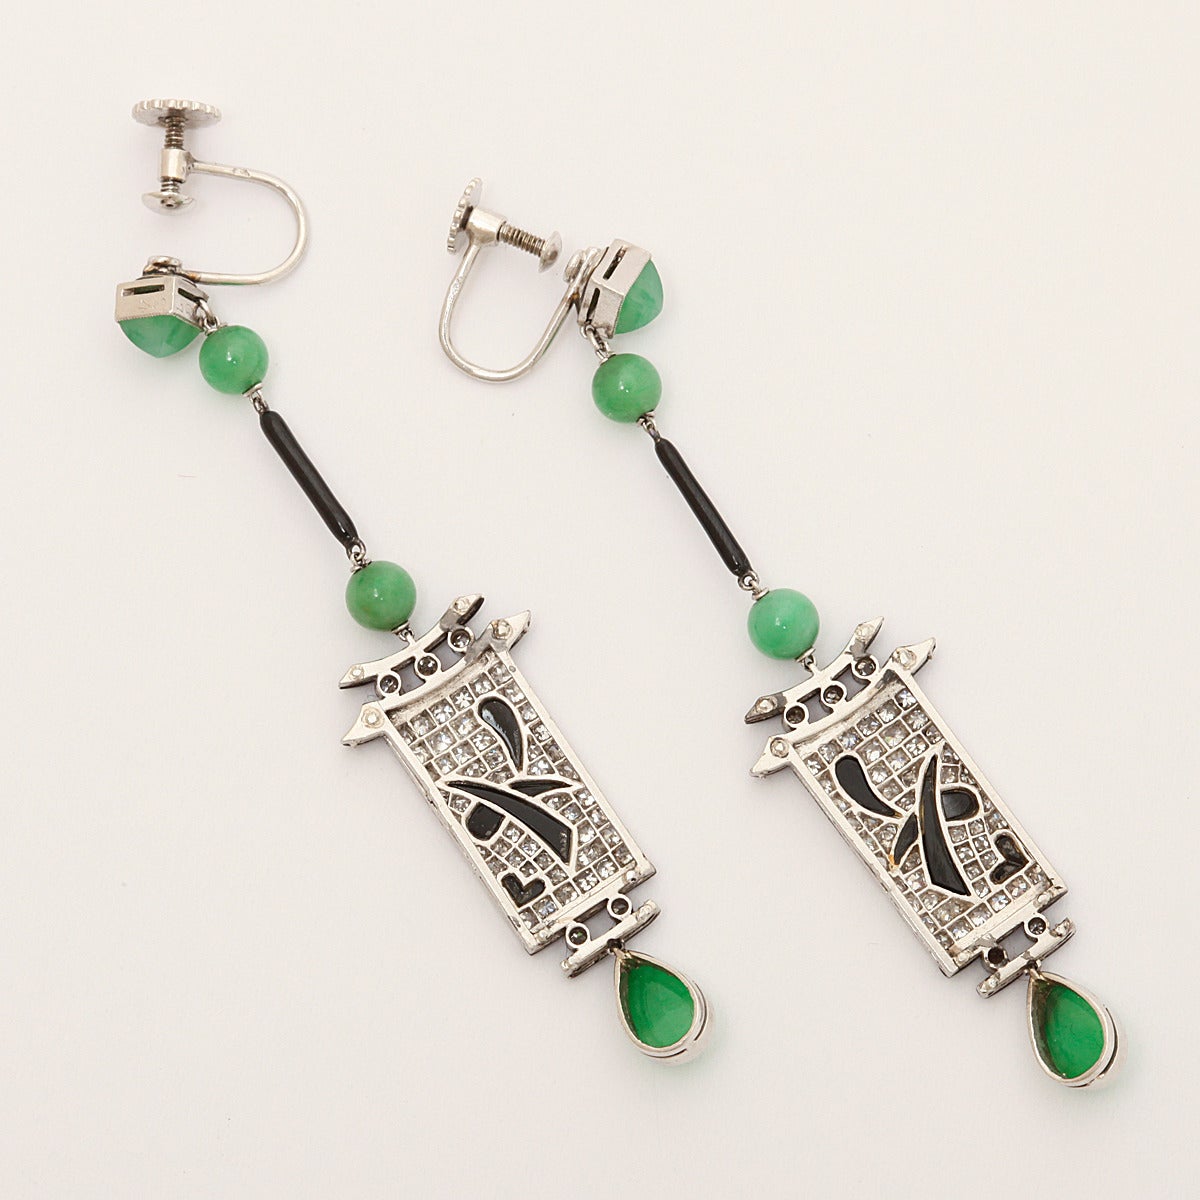 Art Deco jade, diamond, onyx and black enamel dangling Chinese lantern style earrings set in platinum.

French, ca. 1920
Length: 2 1/2 in.